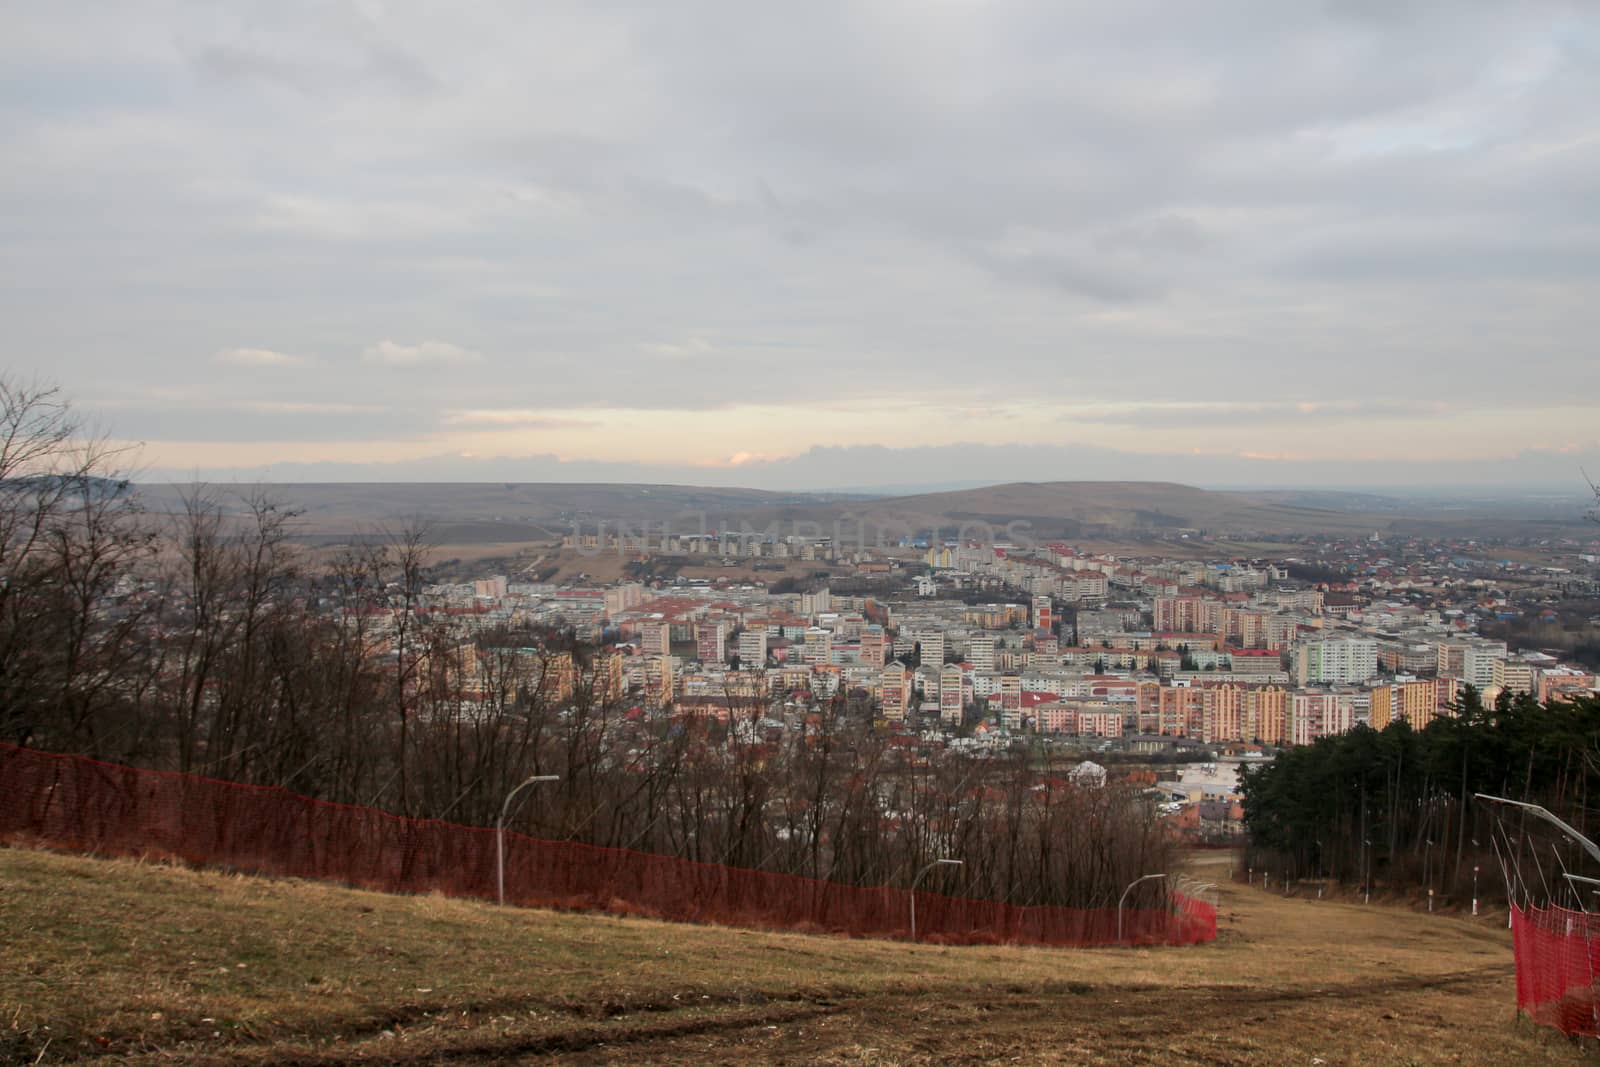 Landscape of city with apartment buildings seen from the hill by codrinn